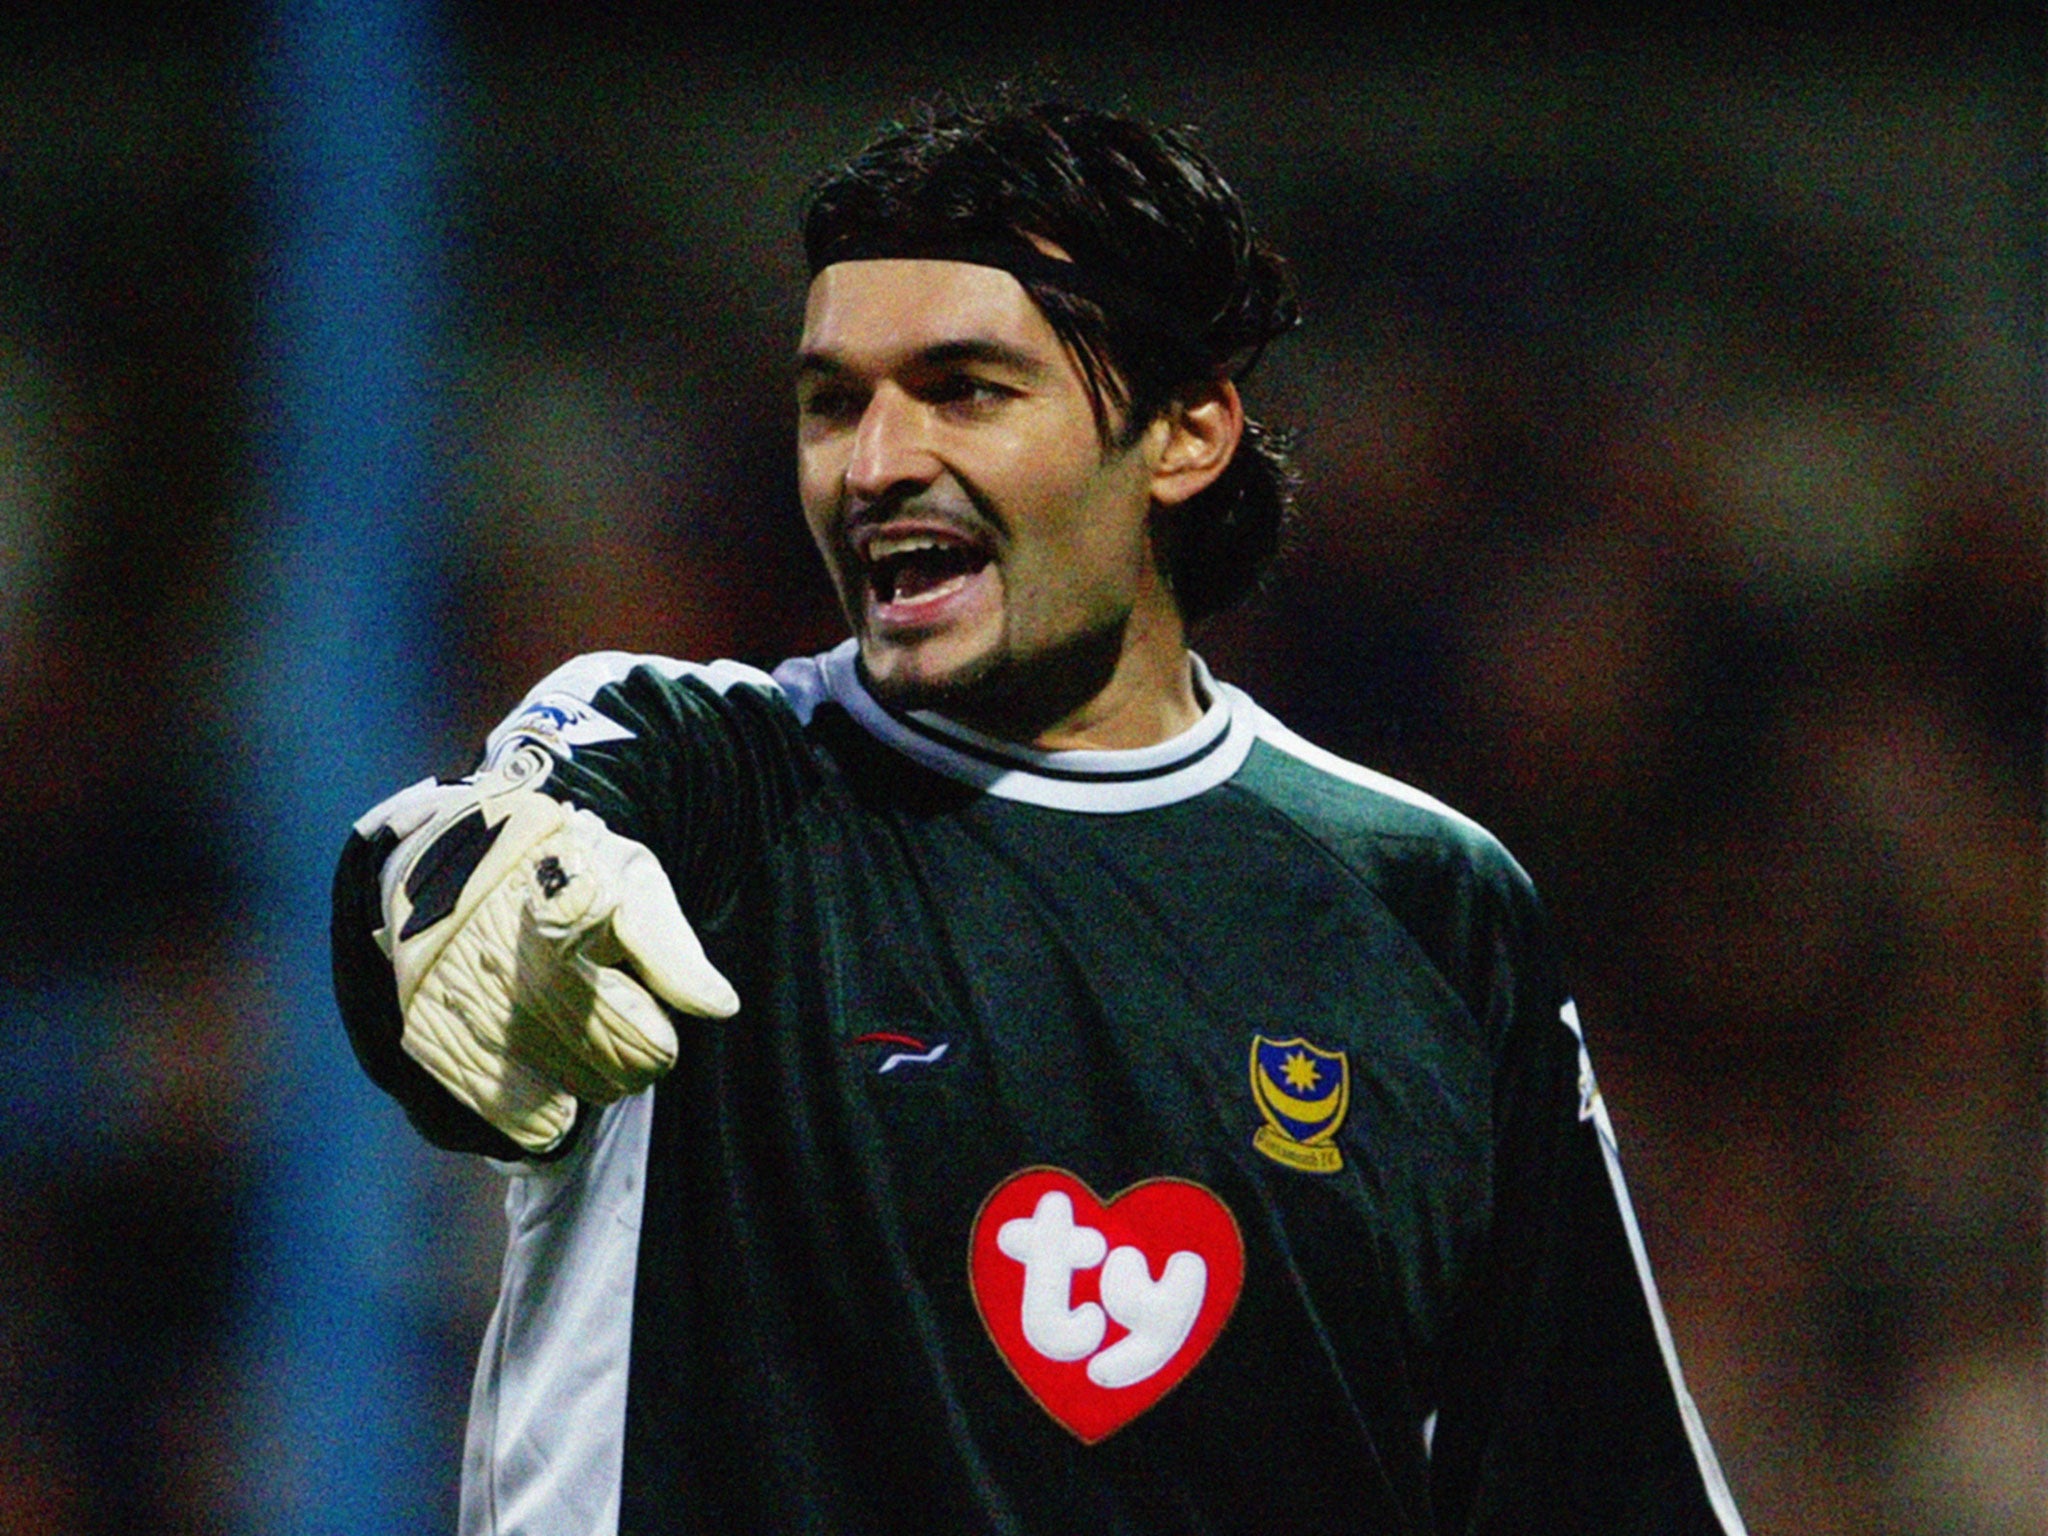 Pavel Srnicek has died at the age of 47 after a cardiac arrest